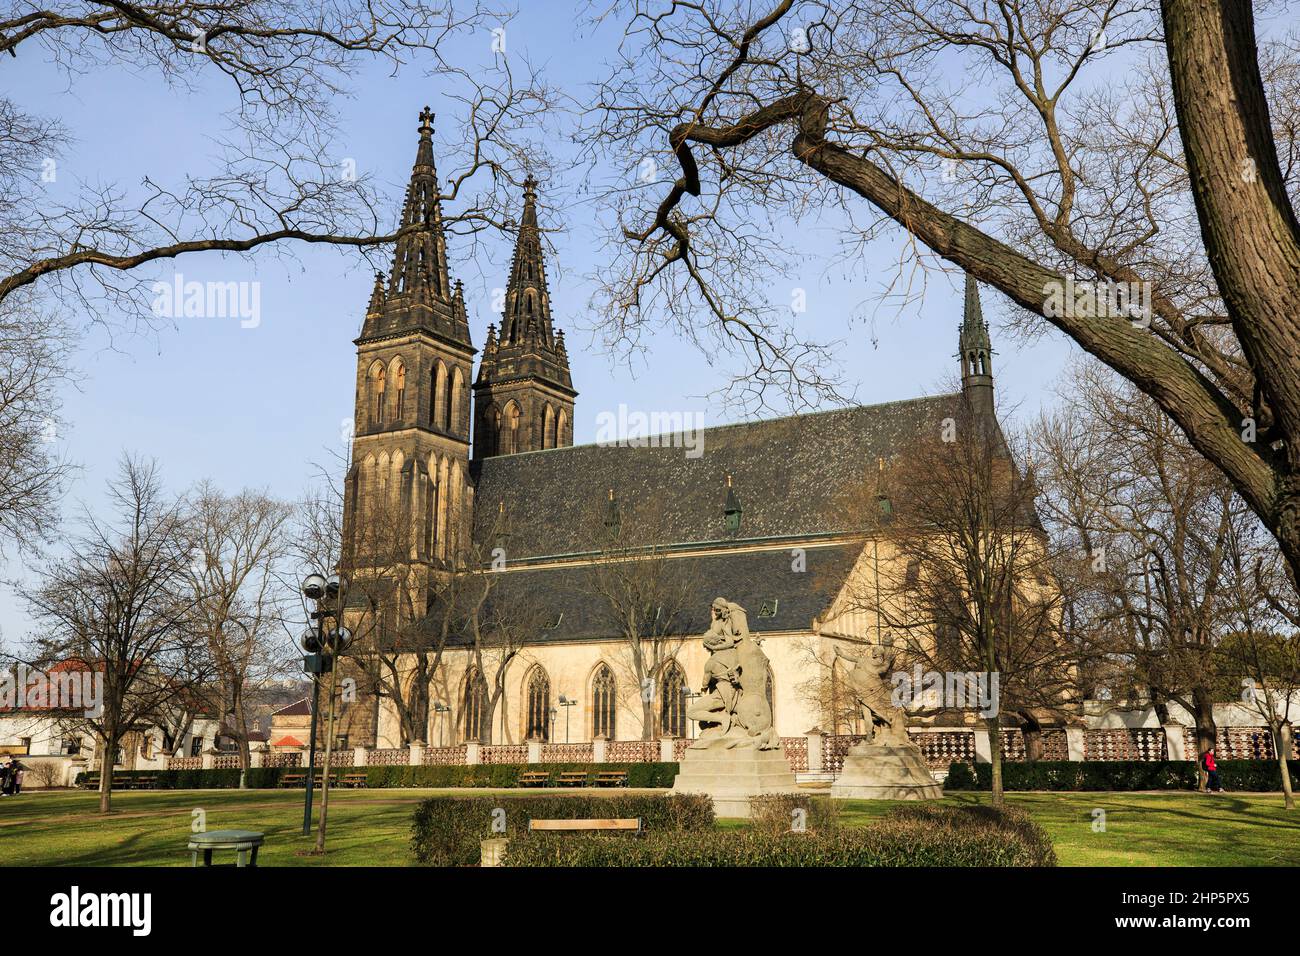 The hollow spires of the church of Basilica of St Peter and St Paul in the Vysehrad Fortress, Prague, Czech republic, on a sunny spring morning Stock Photo